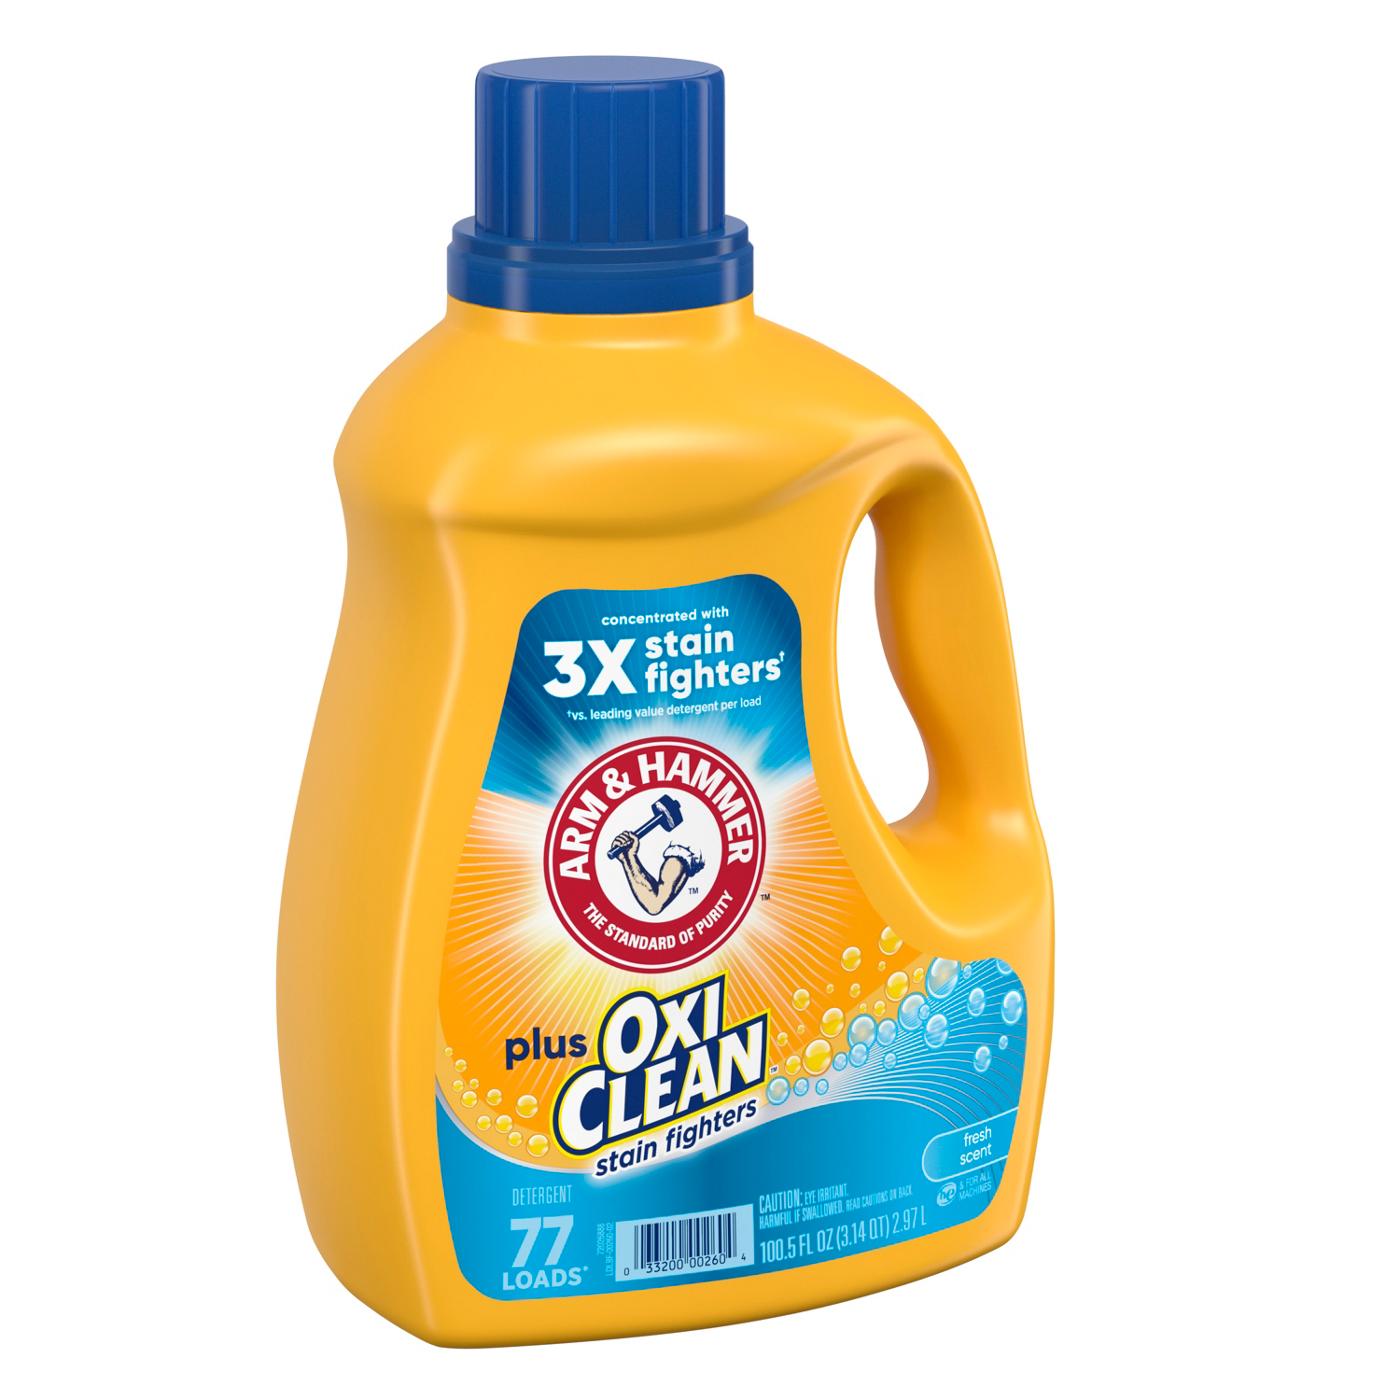 Arm & Hammer Plus OxiClean HE Liquid Laundry Detergent, 77 Loads - Fresh Scent; image 4 of 4